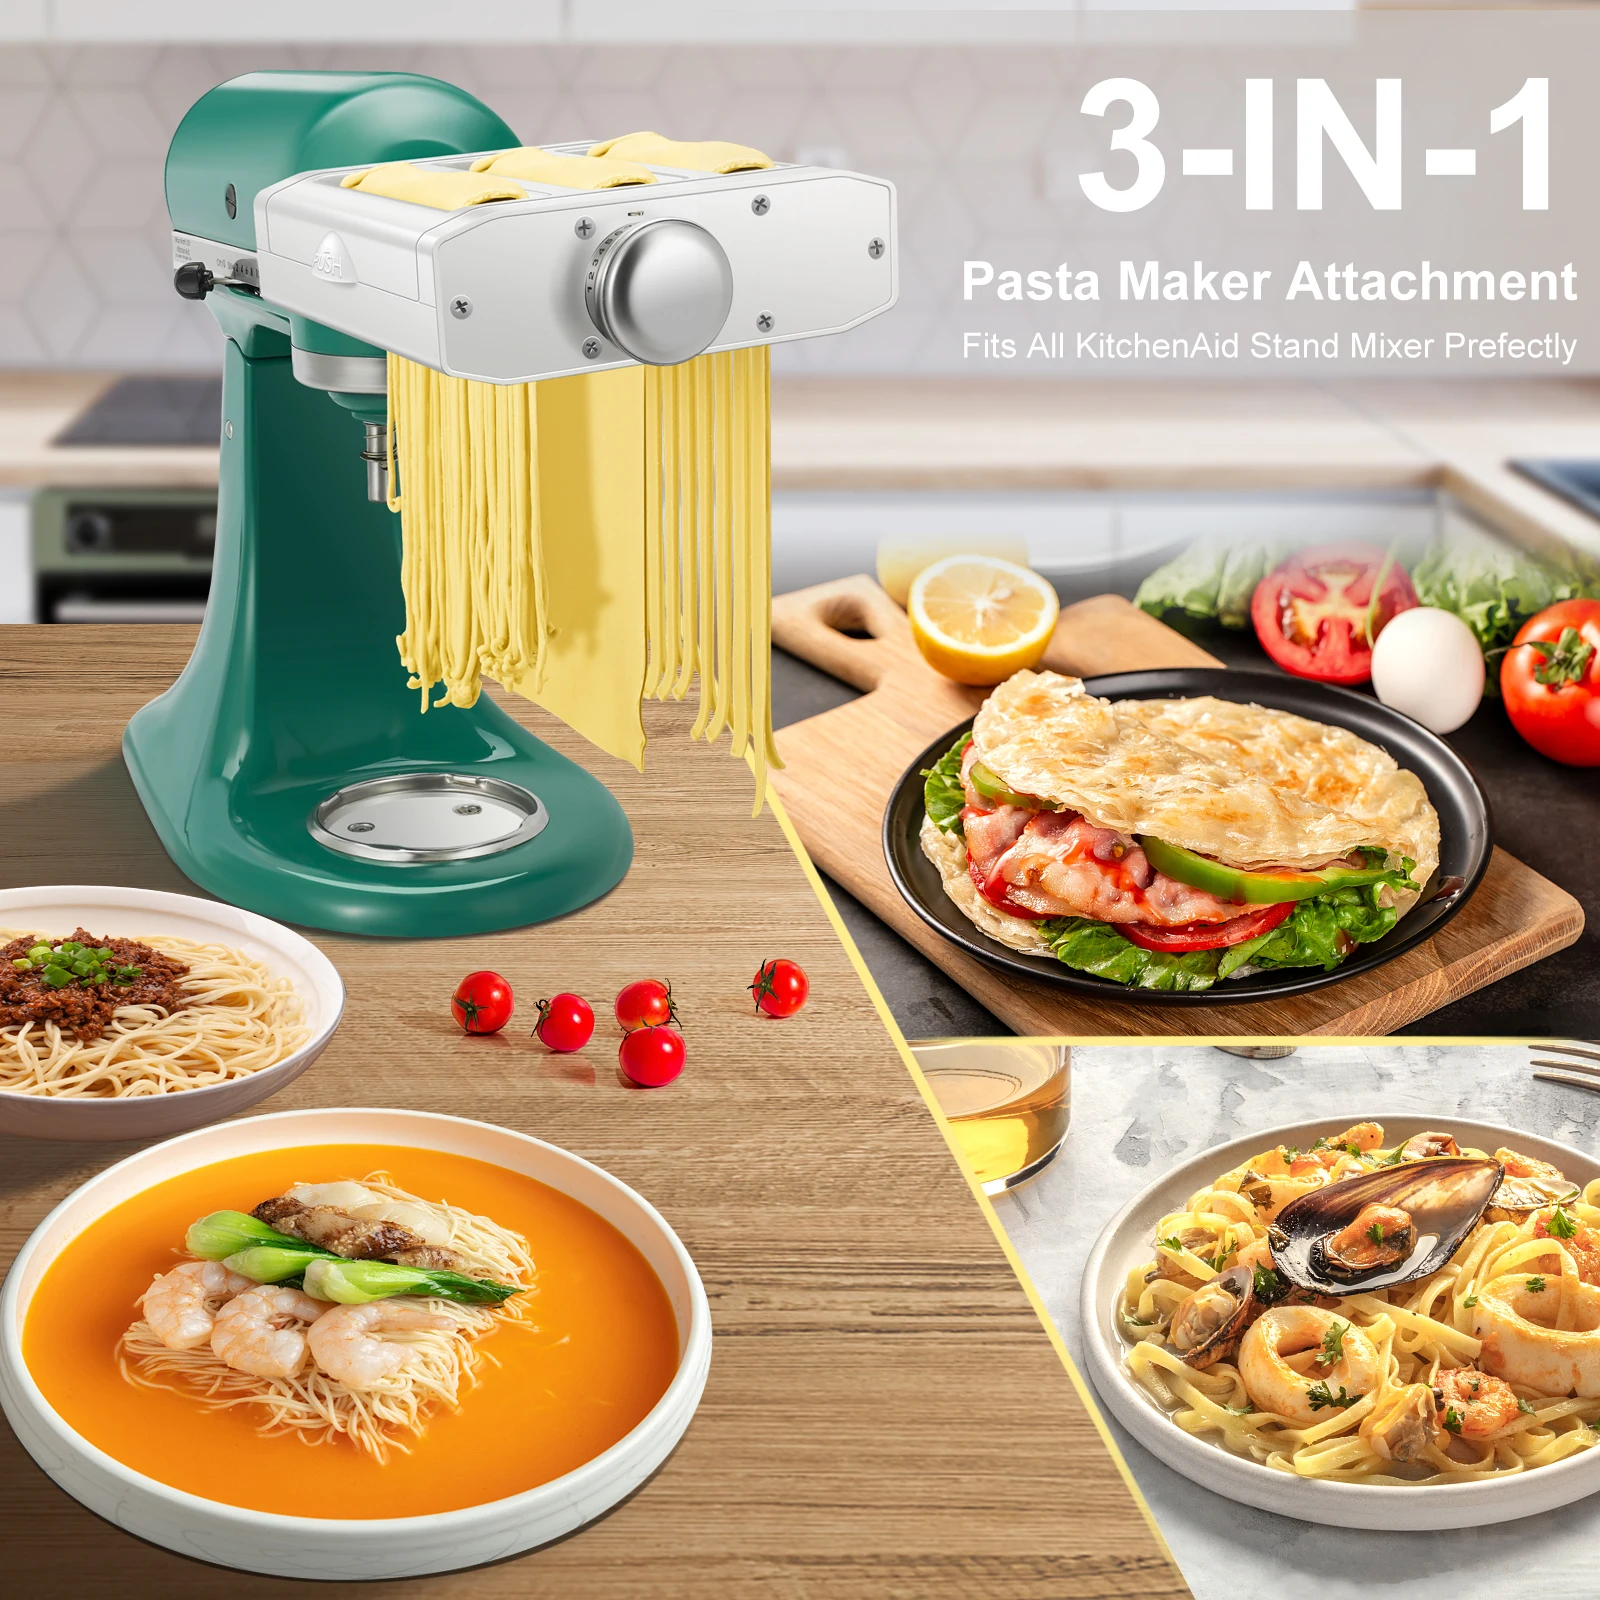 https://ae01.alicdn.com/kf/Sd55278e302574006baaaeab7592028561/Amzchef-3-in-1-Pasta-Roller-For-Kitchenaid-Stand-Mixer-Accessories-Set-Attachment-Stainless-Steel-Pasta.jpg